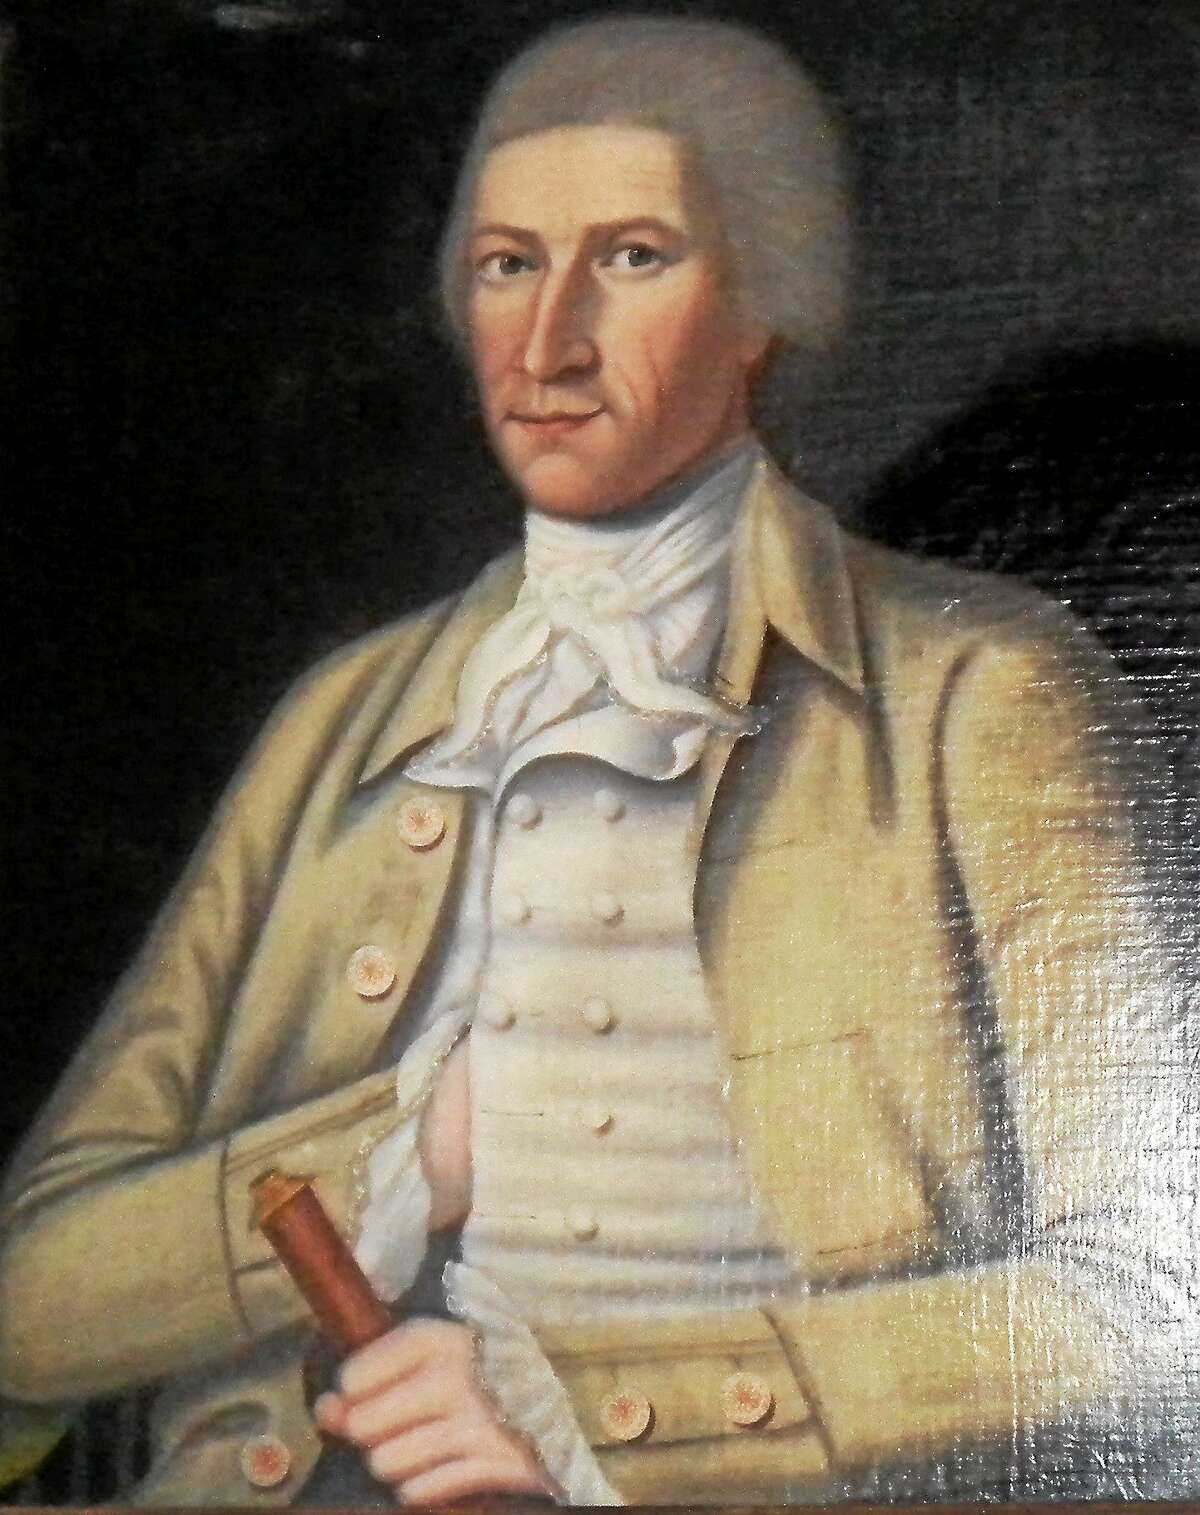 Shown is an early 19th-century portrait of Middletown sea captain William Van Deursen, who made regular runs to the Caribbean, and also trafficked in slaves.